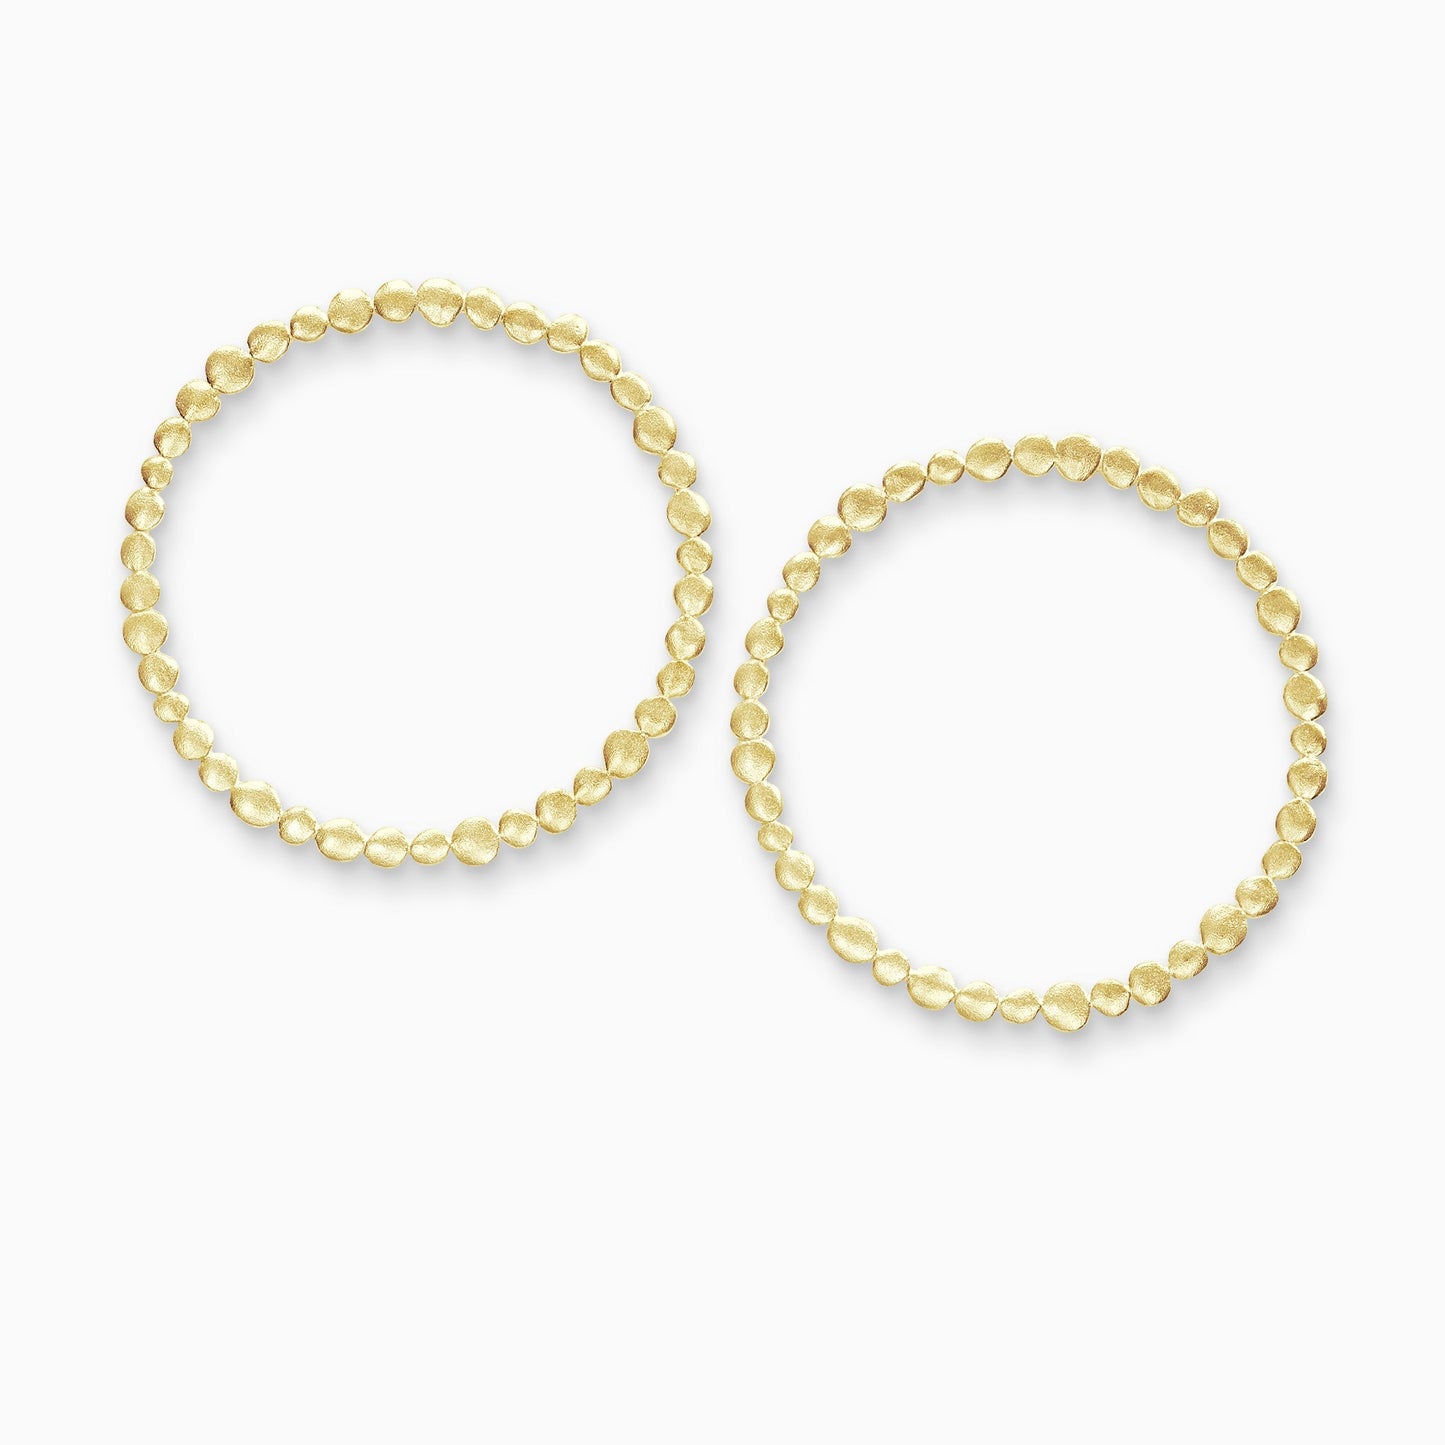 A pair of 18ct Fairtrade yellow gold earrings made of tiny undulating textured and connected dots forming a closed circle. 60mm outside diameter 